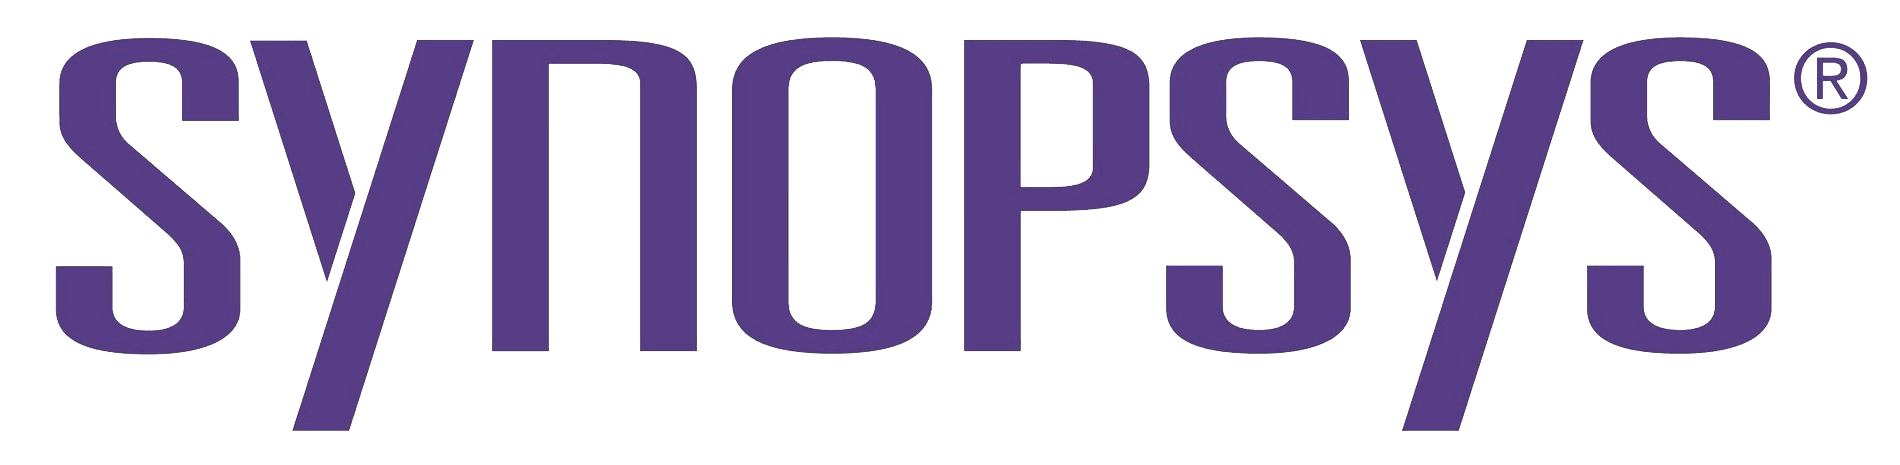 Meet Synopsys, Coveo AI-powered relevance engine user